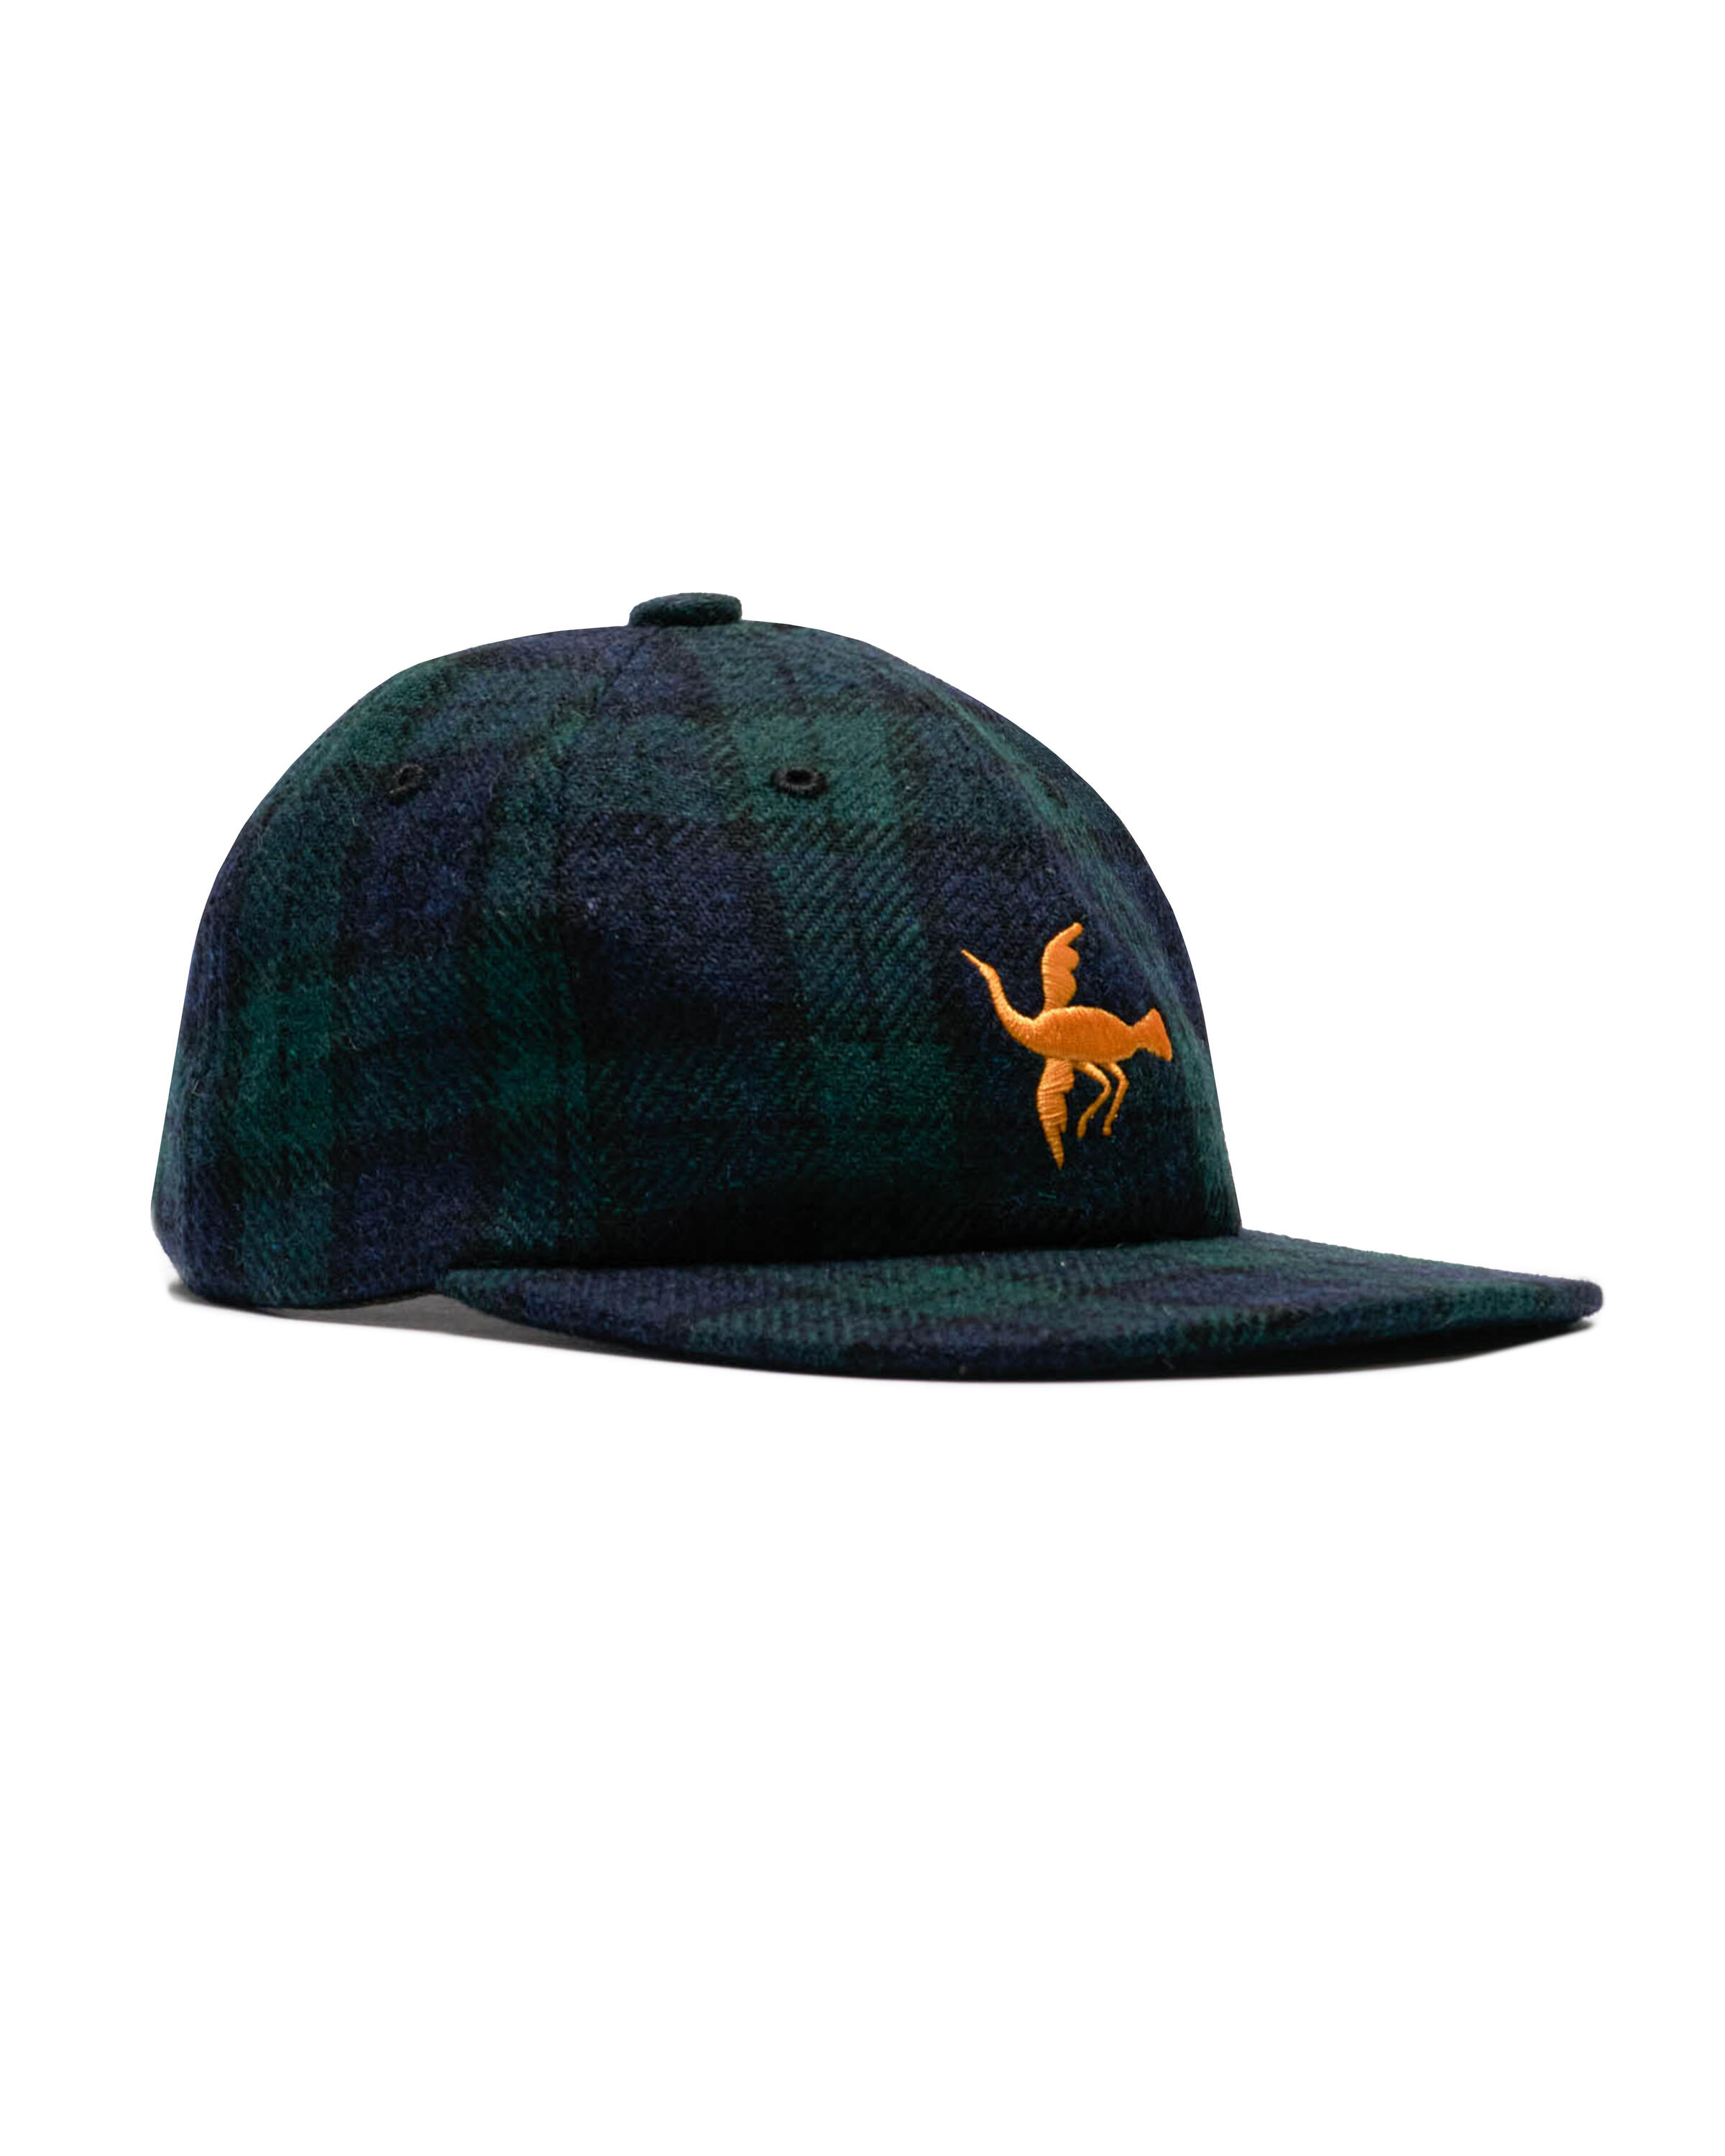 by Parra clipped wings 6 panel hat